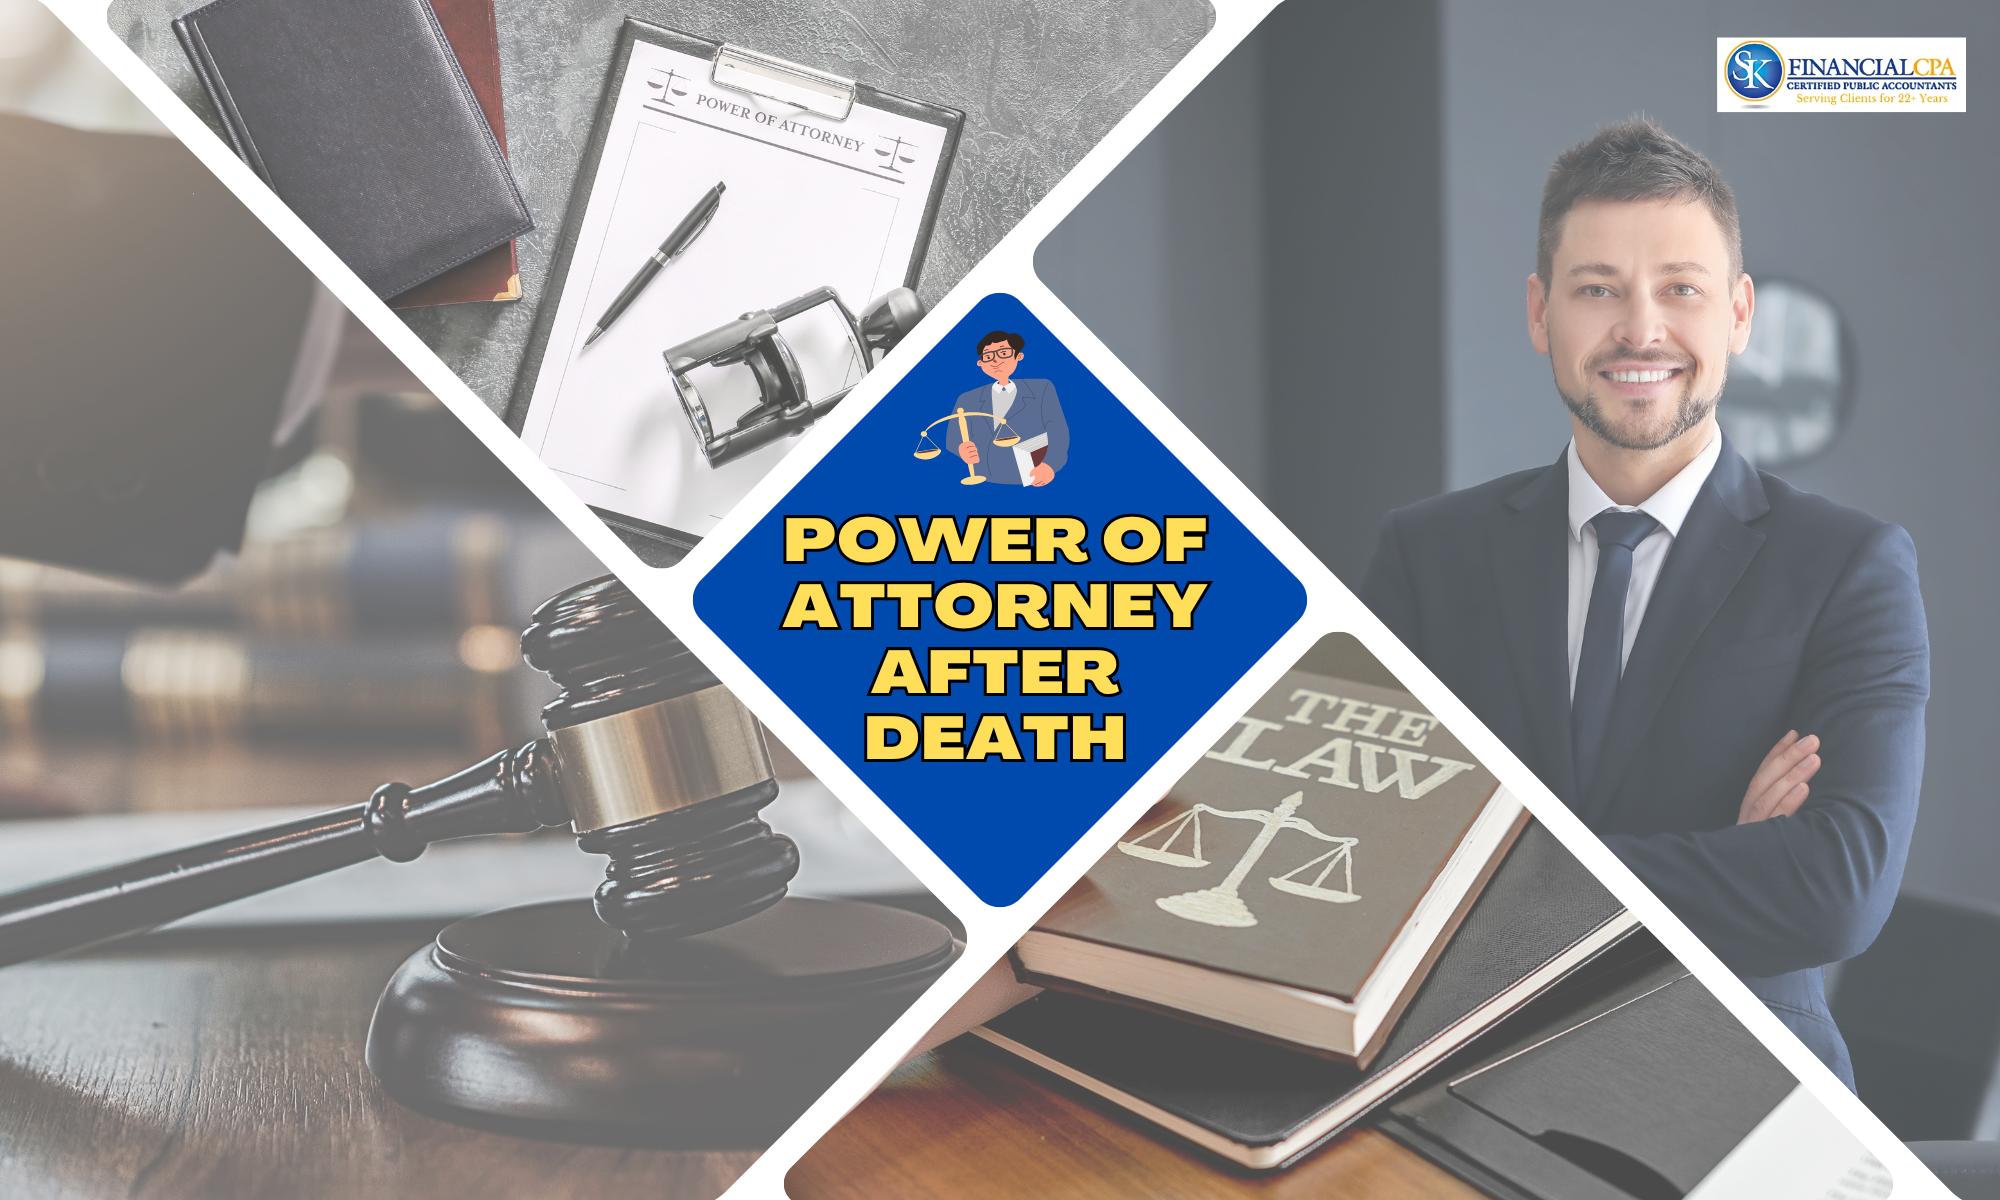 Power of Attorney After Death: A few things you should know